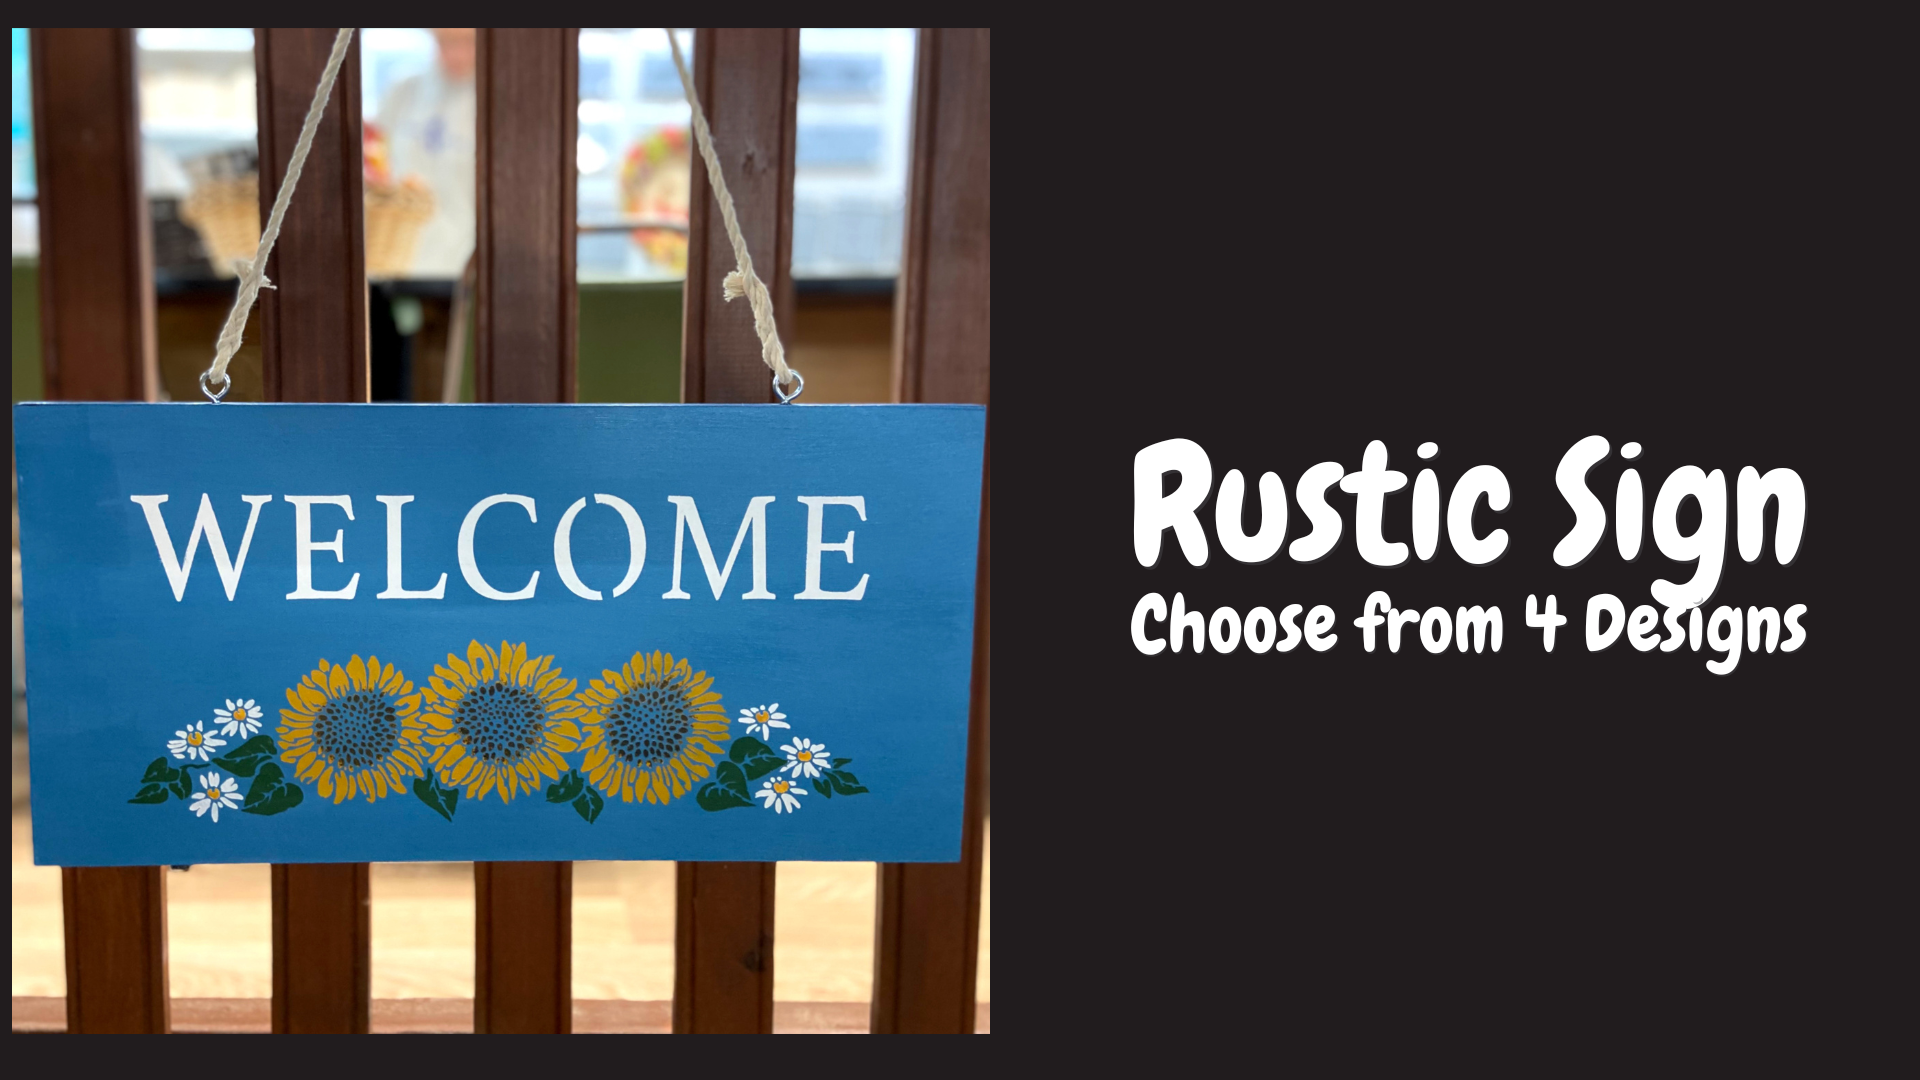 In Person Workshop - Rustic Sign - Choose from 4 Designs